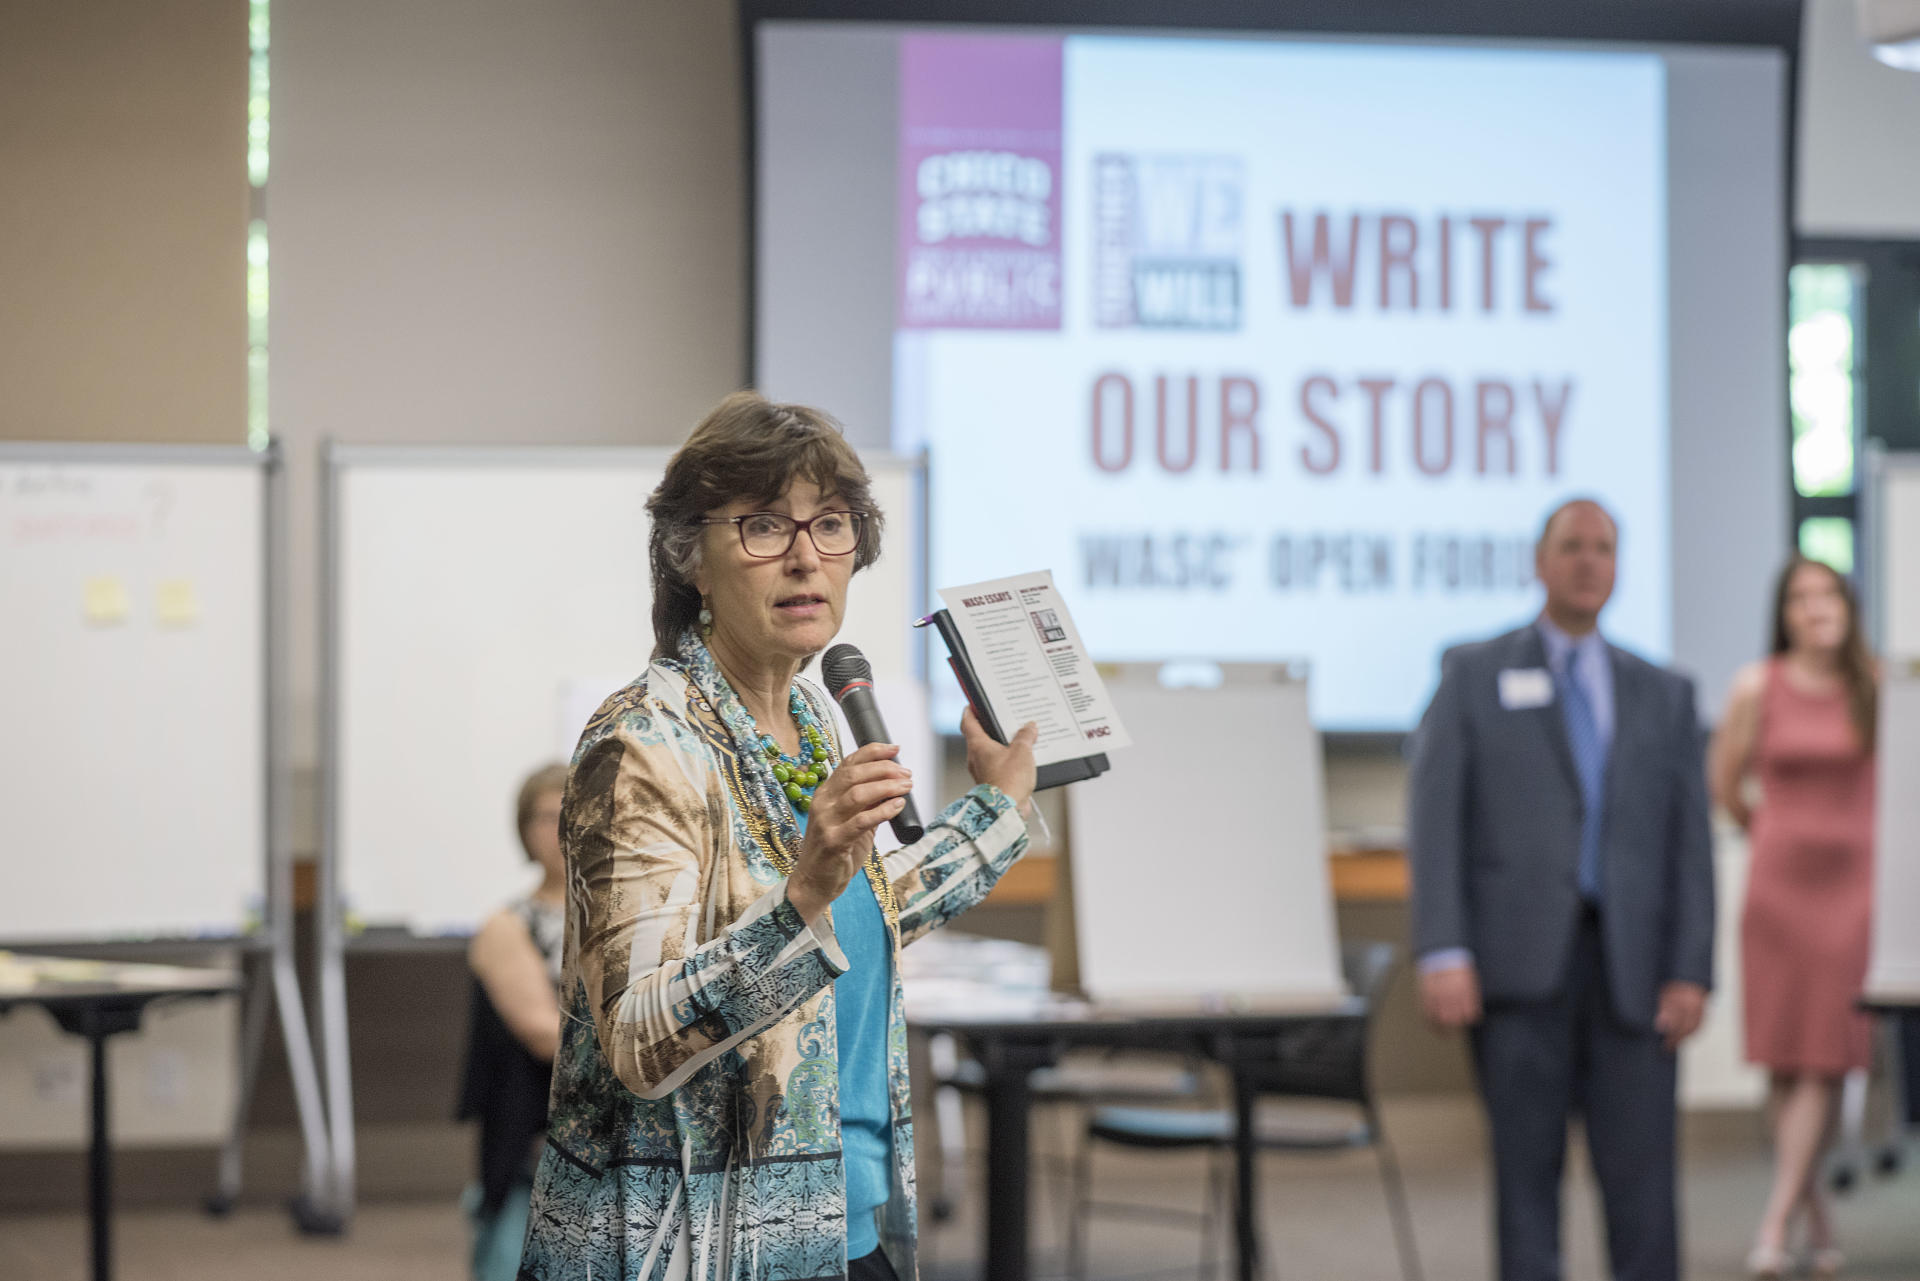 Gayle Hutchinson (center) talks to students, staff, and faculty to participate in the Together We Will … Write Our Story: WASC Open Forum on Monday, May 1, 2017 in Chico, Calif. The drop-in forum provides an initial opportunity for students, faculty, and staff to meet representatives of WASC Essay Committees who are charged with writing sections of the Institutional Report, an essential part of our reaccreditation effort. (Jason Halley/University Photographer)